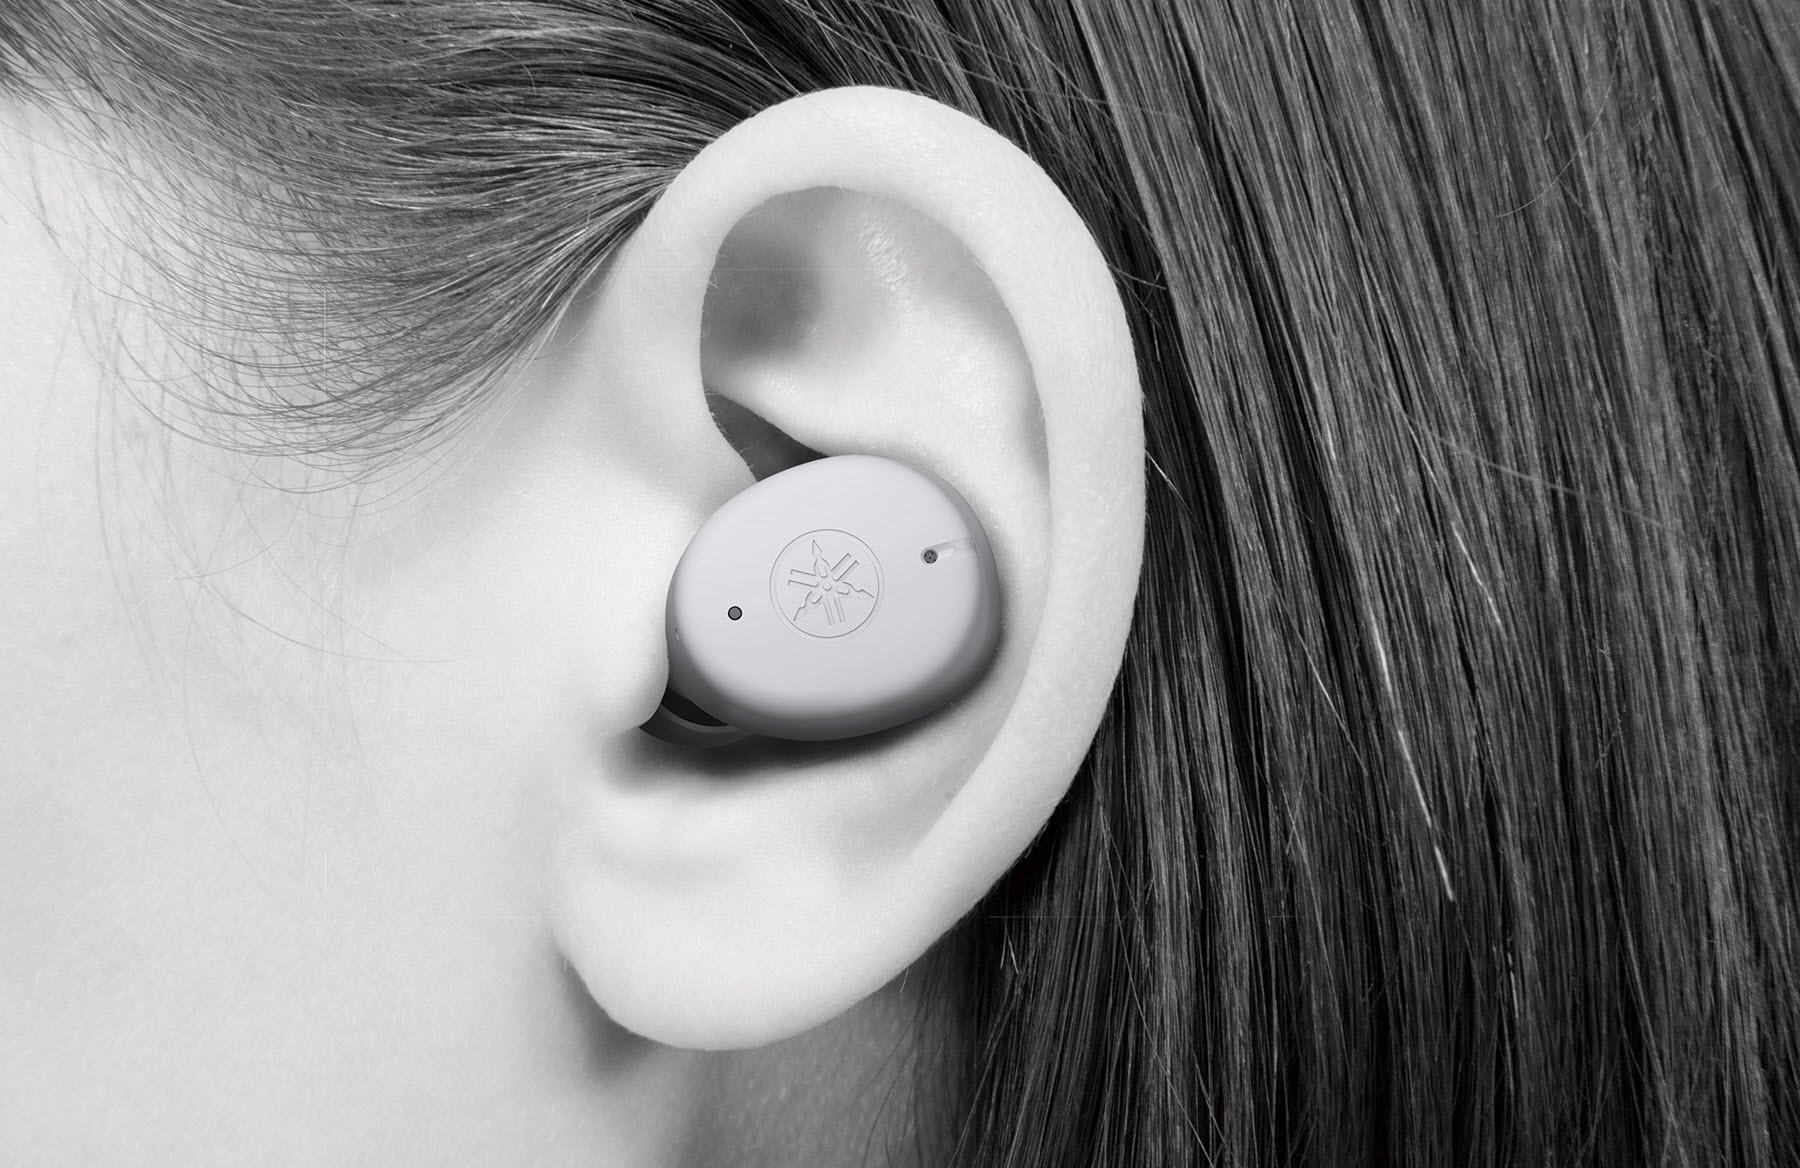 Closeup of a person's ear with an ear bud in it.